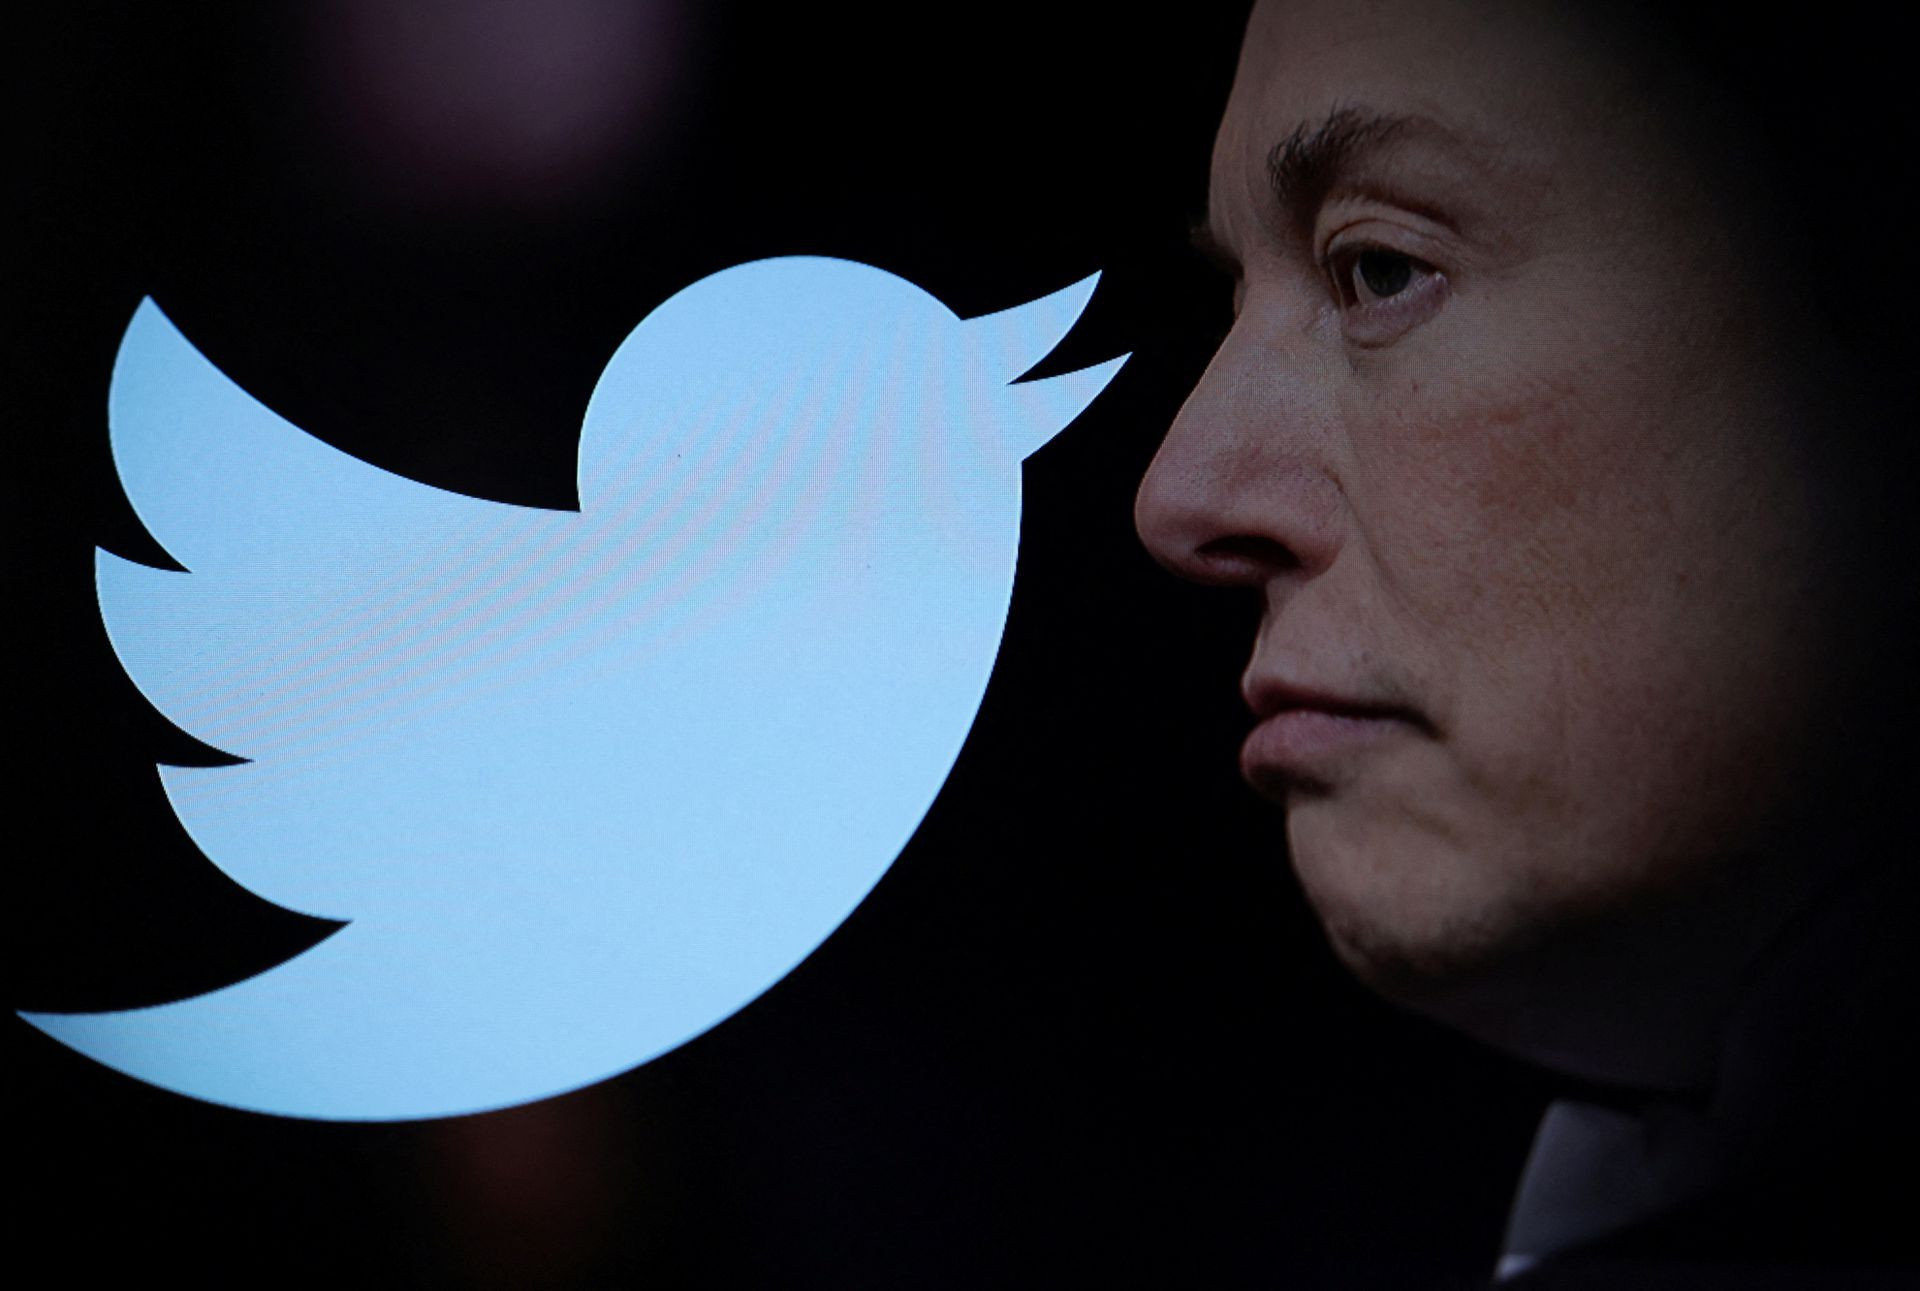 Musk says Twitter is roughly breaking even, has 1,500 employees